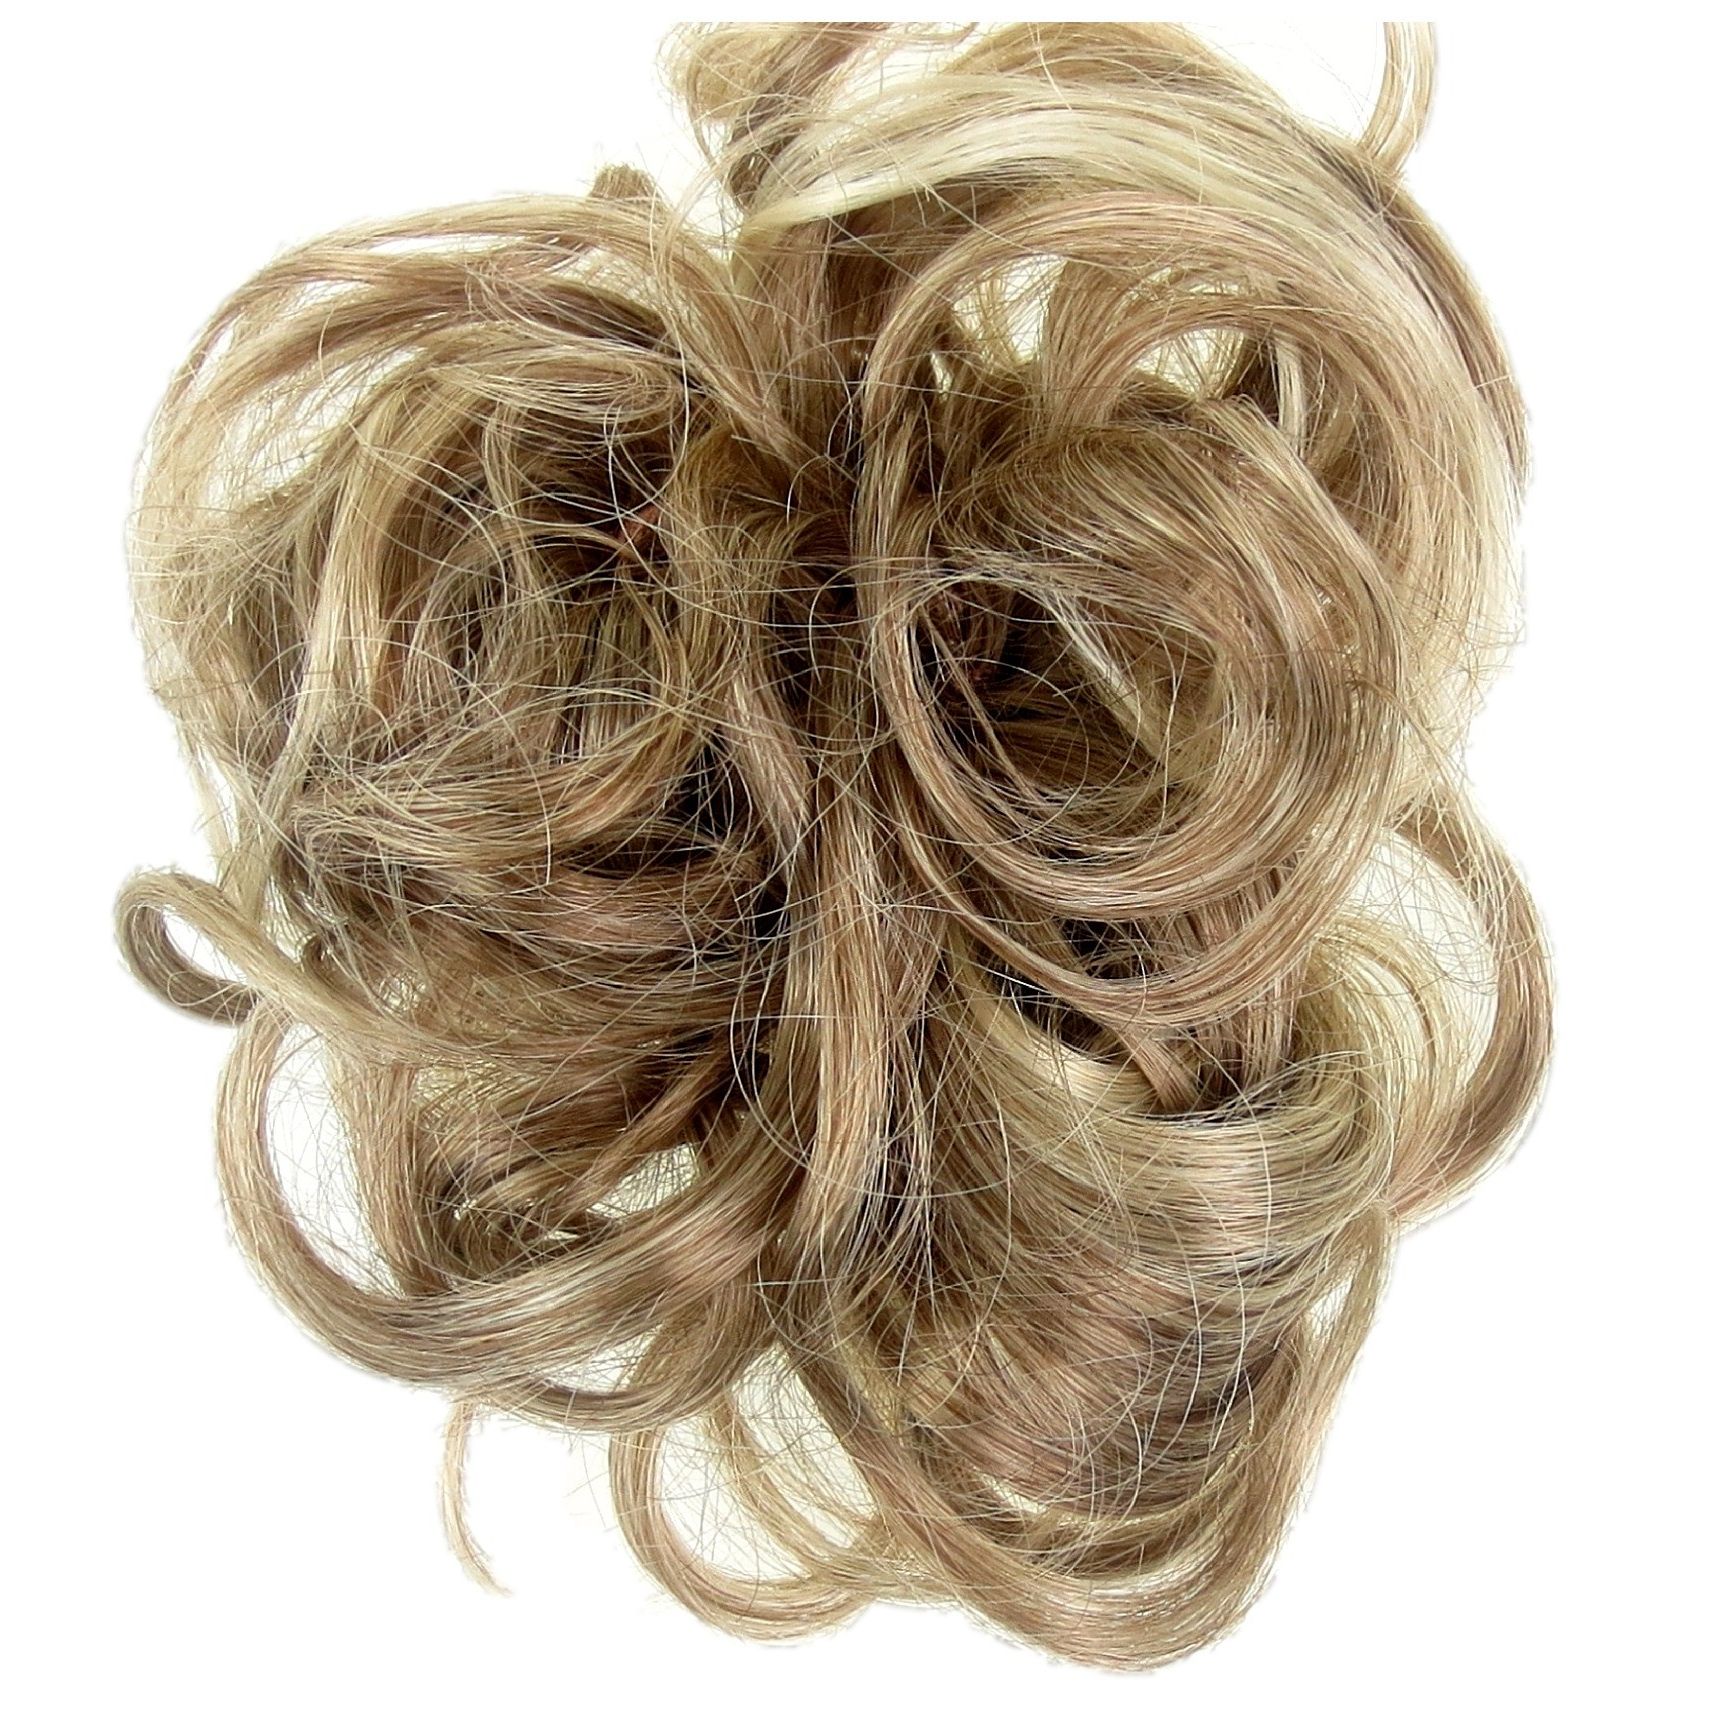 Hair Extension Scrunchie Hot Auburn Copper Up Do Down Do Curly Intended For Most Popular Curly Bun Bridal Updos For Shorter Hair (View 13 of 20)